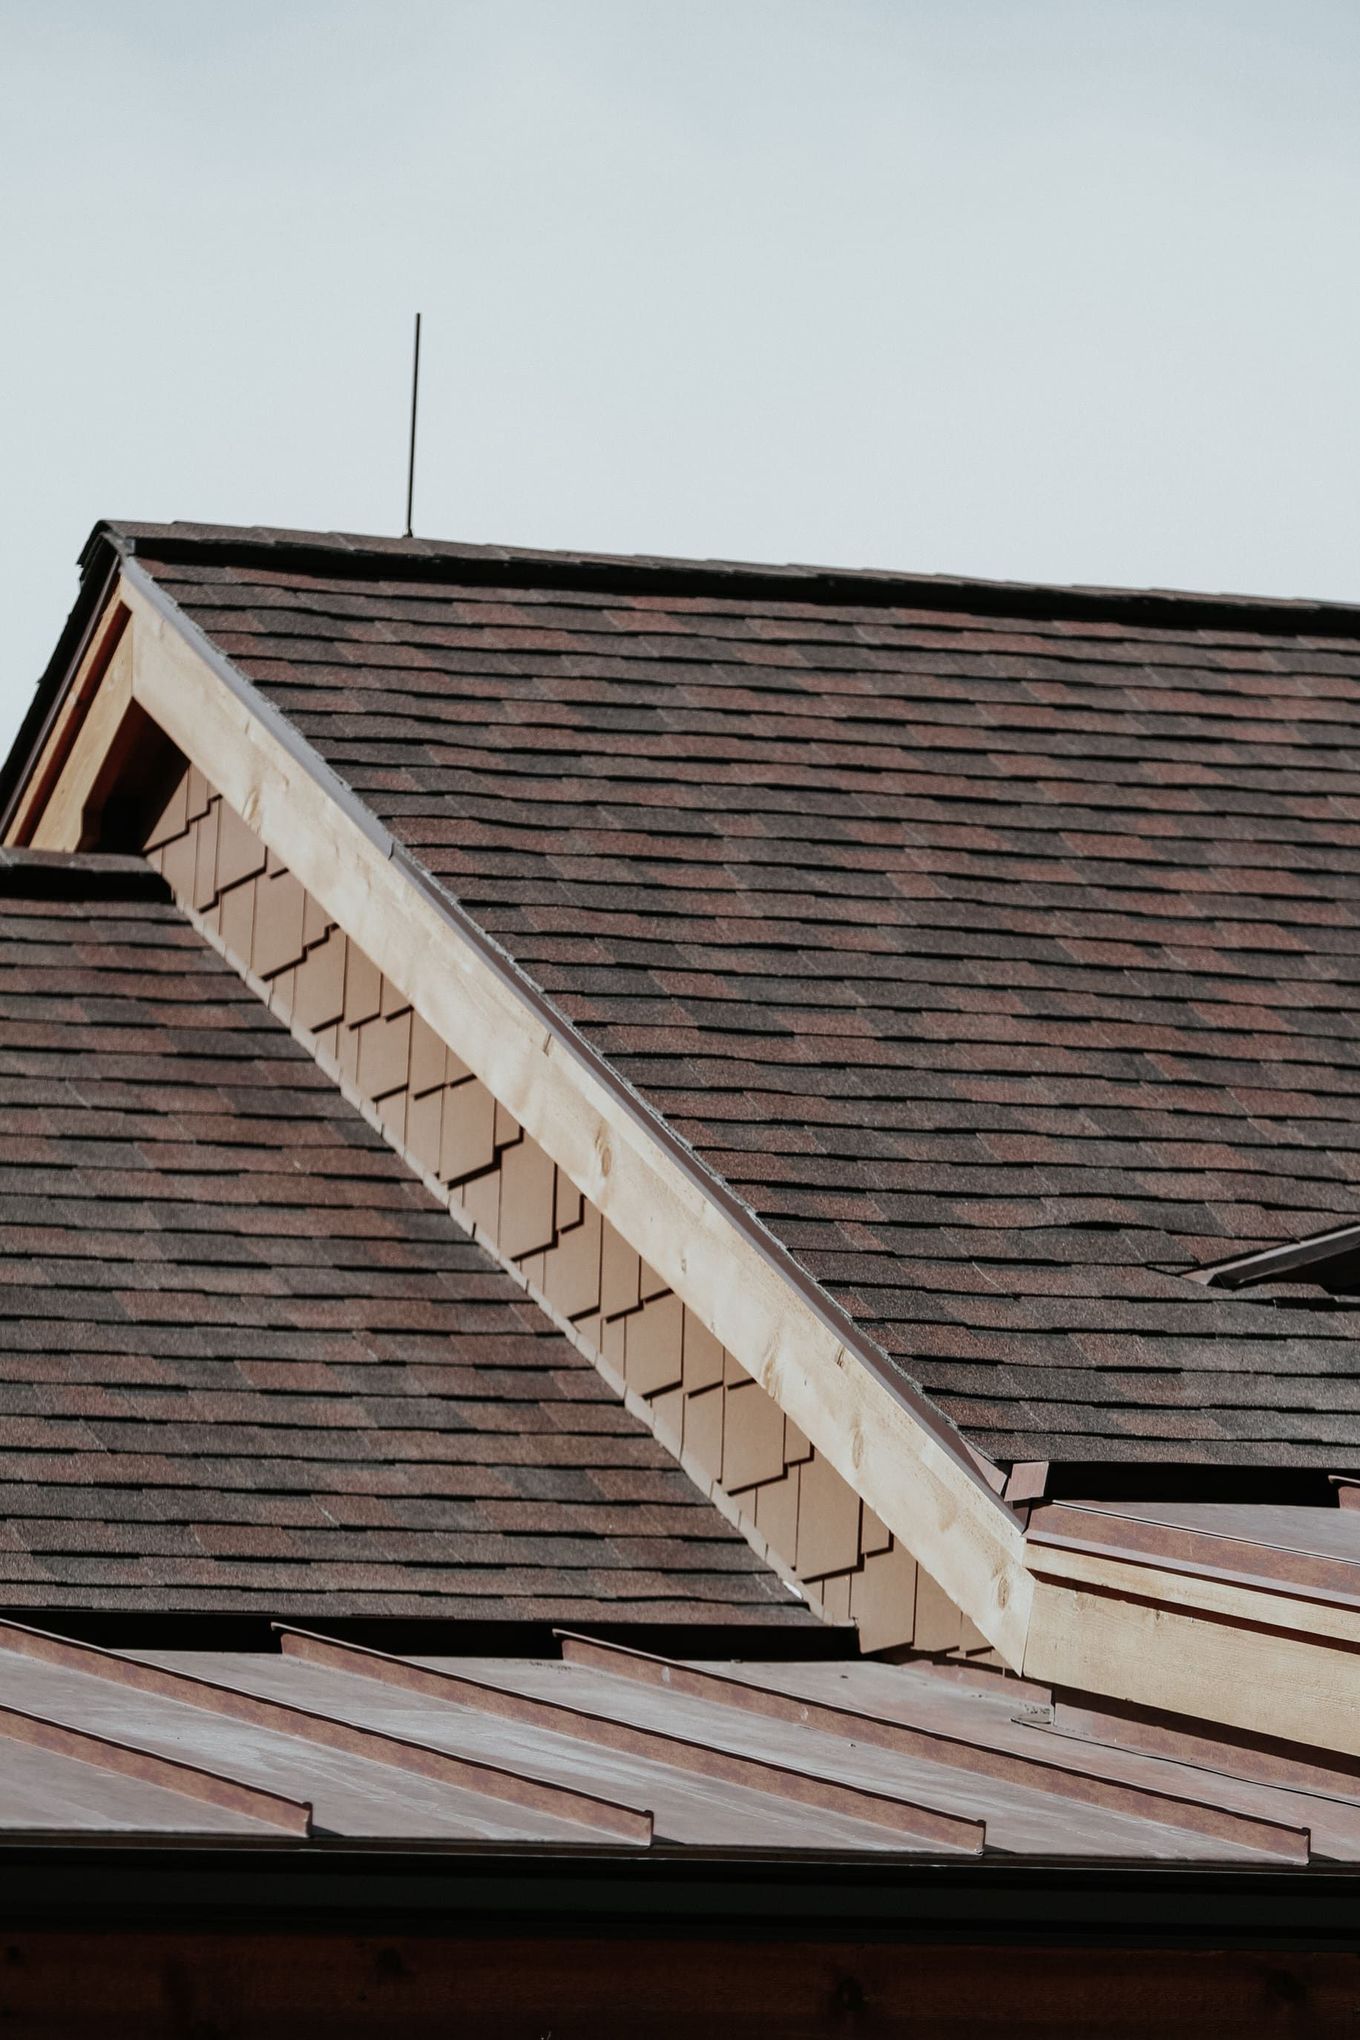 A close up of a roof with a wooden trim